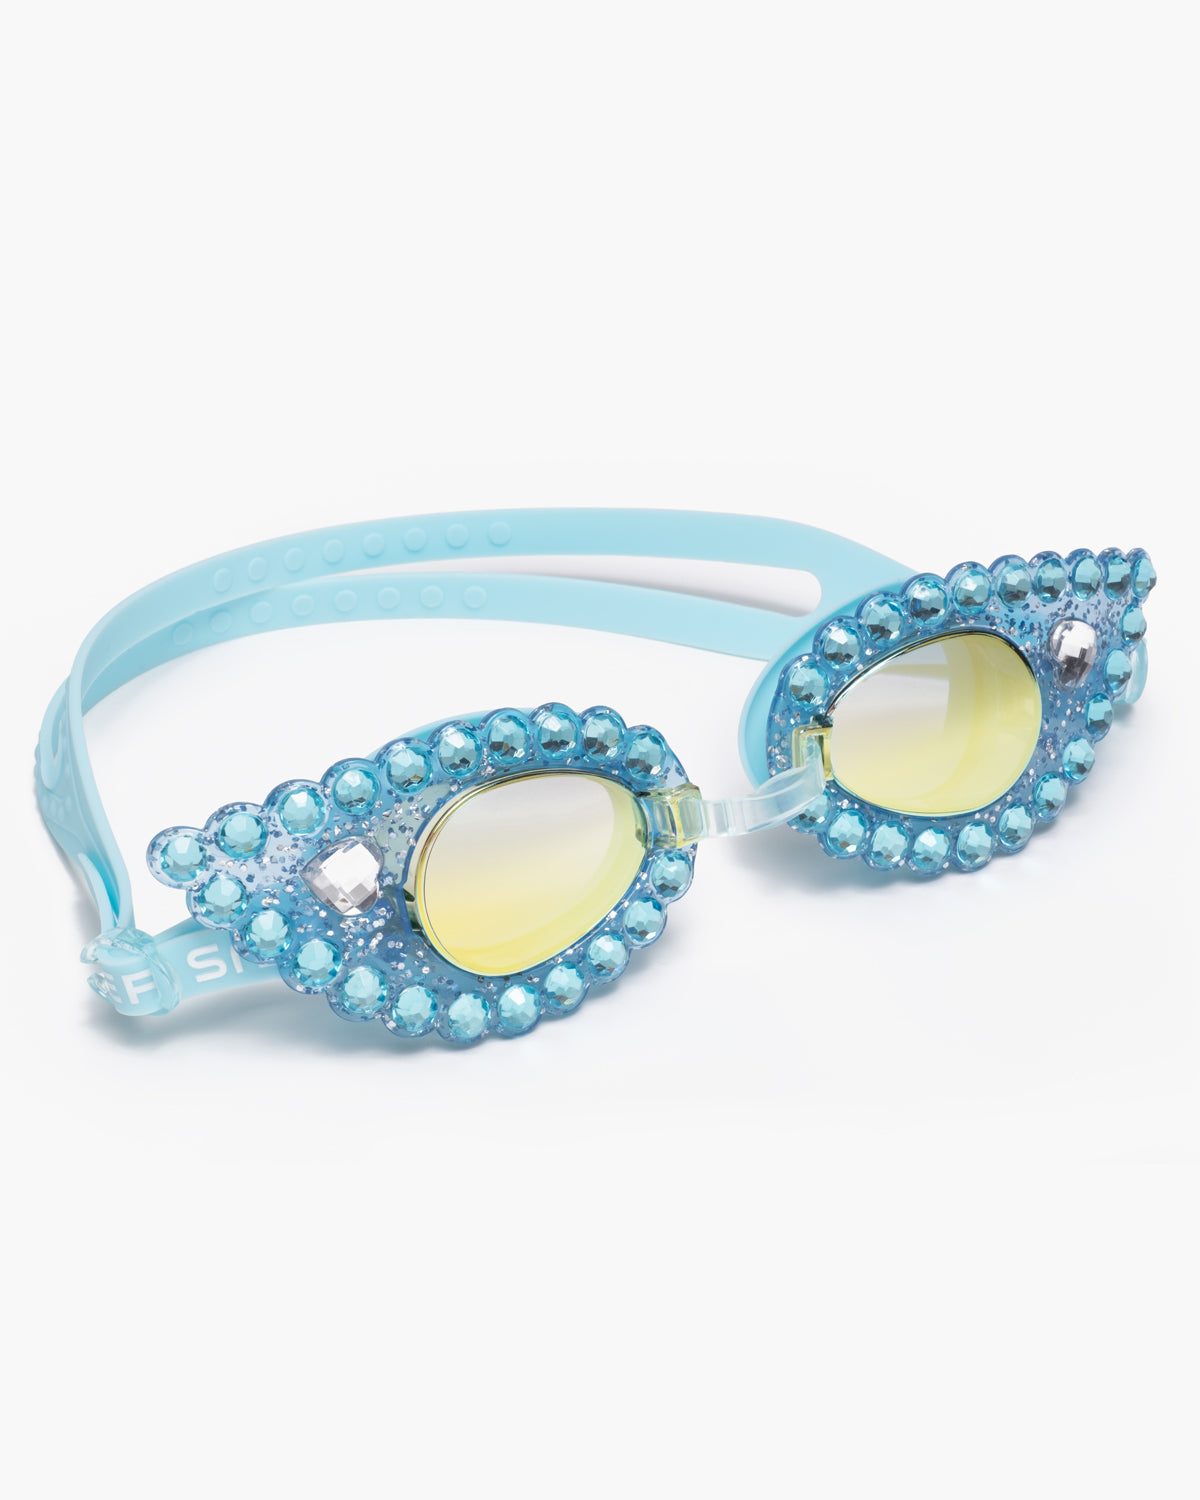 Dolphin Dive Goggles - Twinkle Twinkle Little One